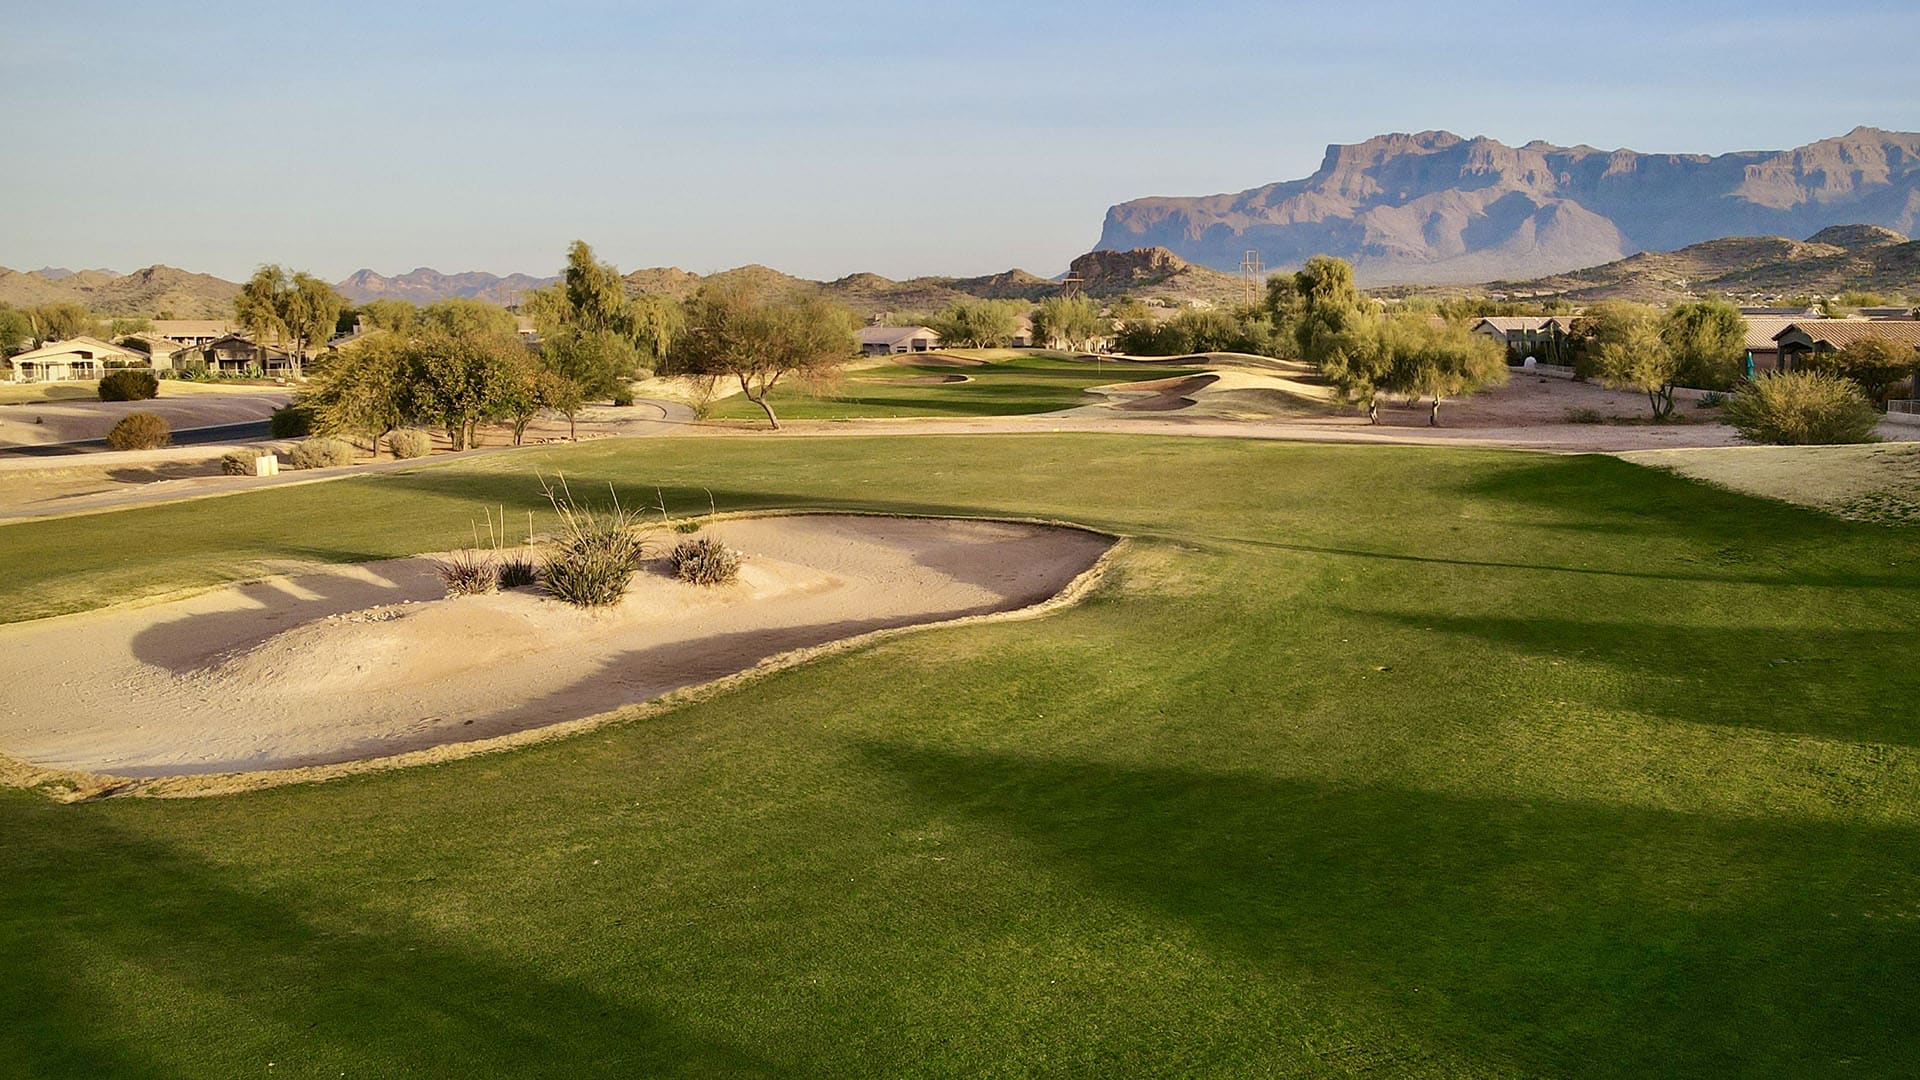 Lush golf course with sand traps and rocky mountains in the background.